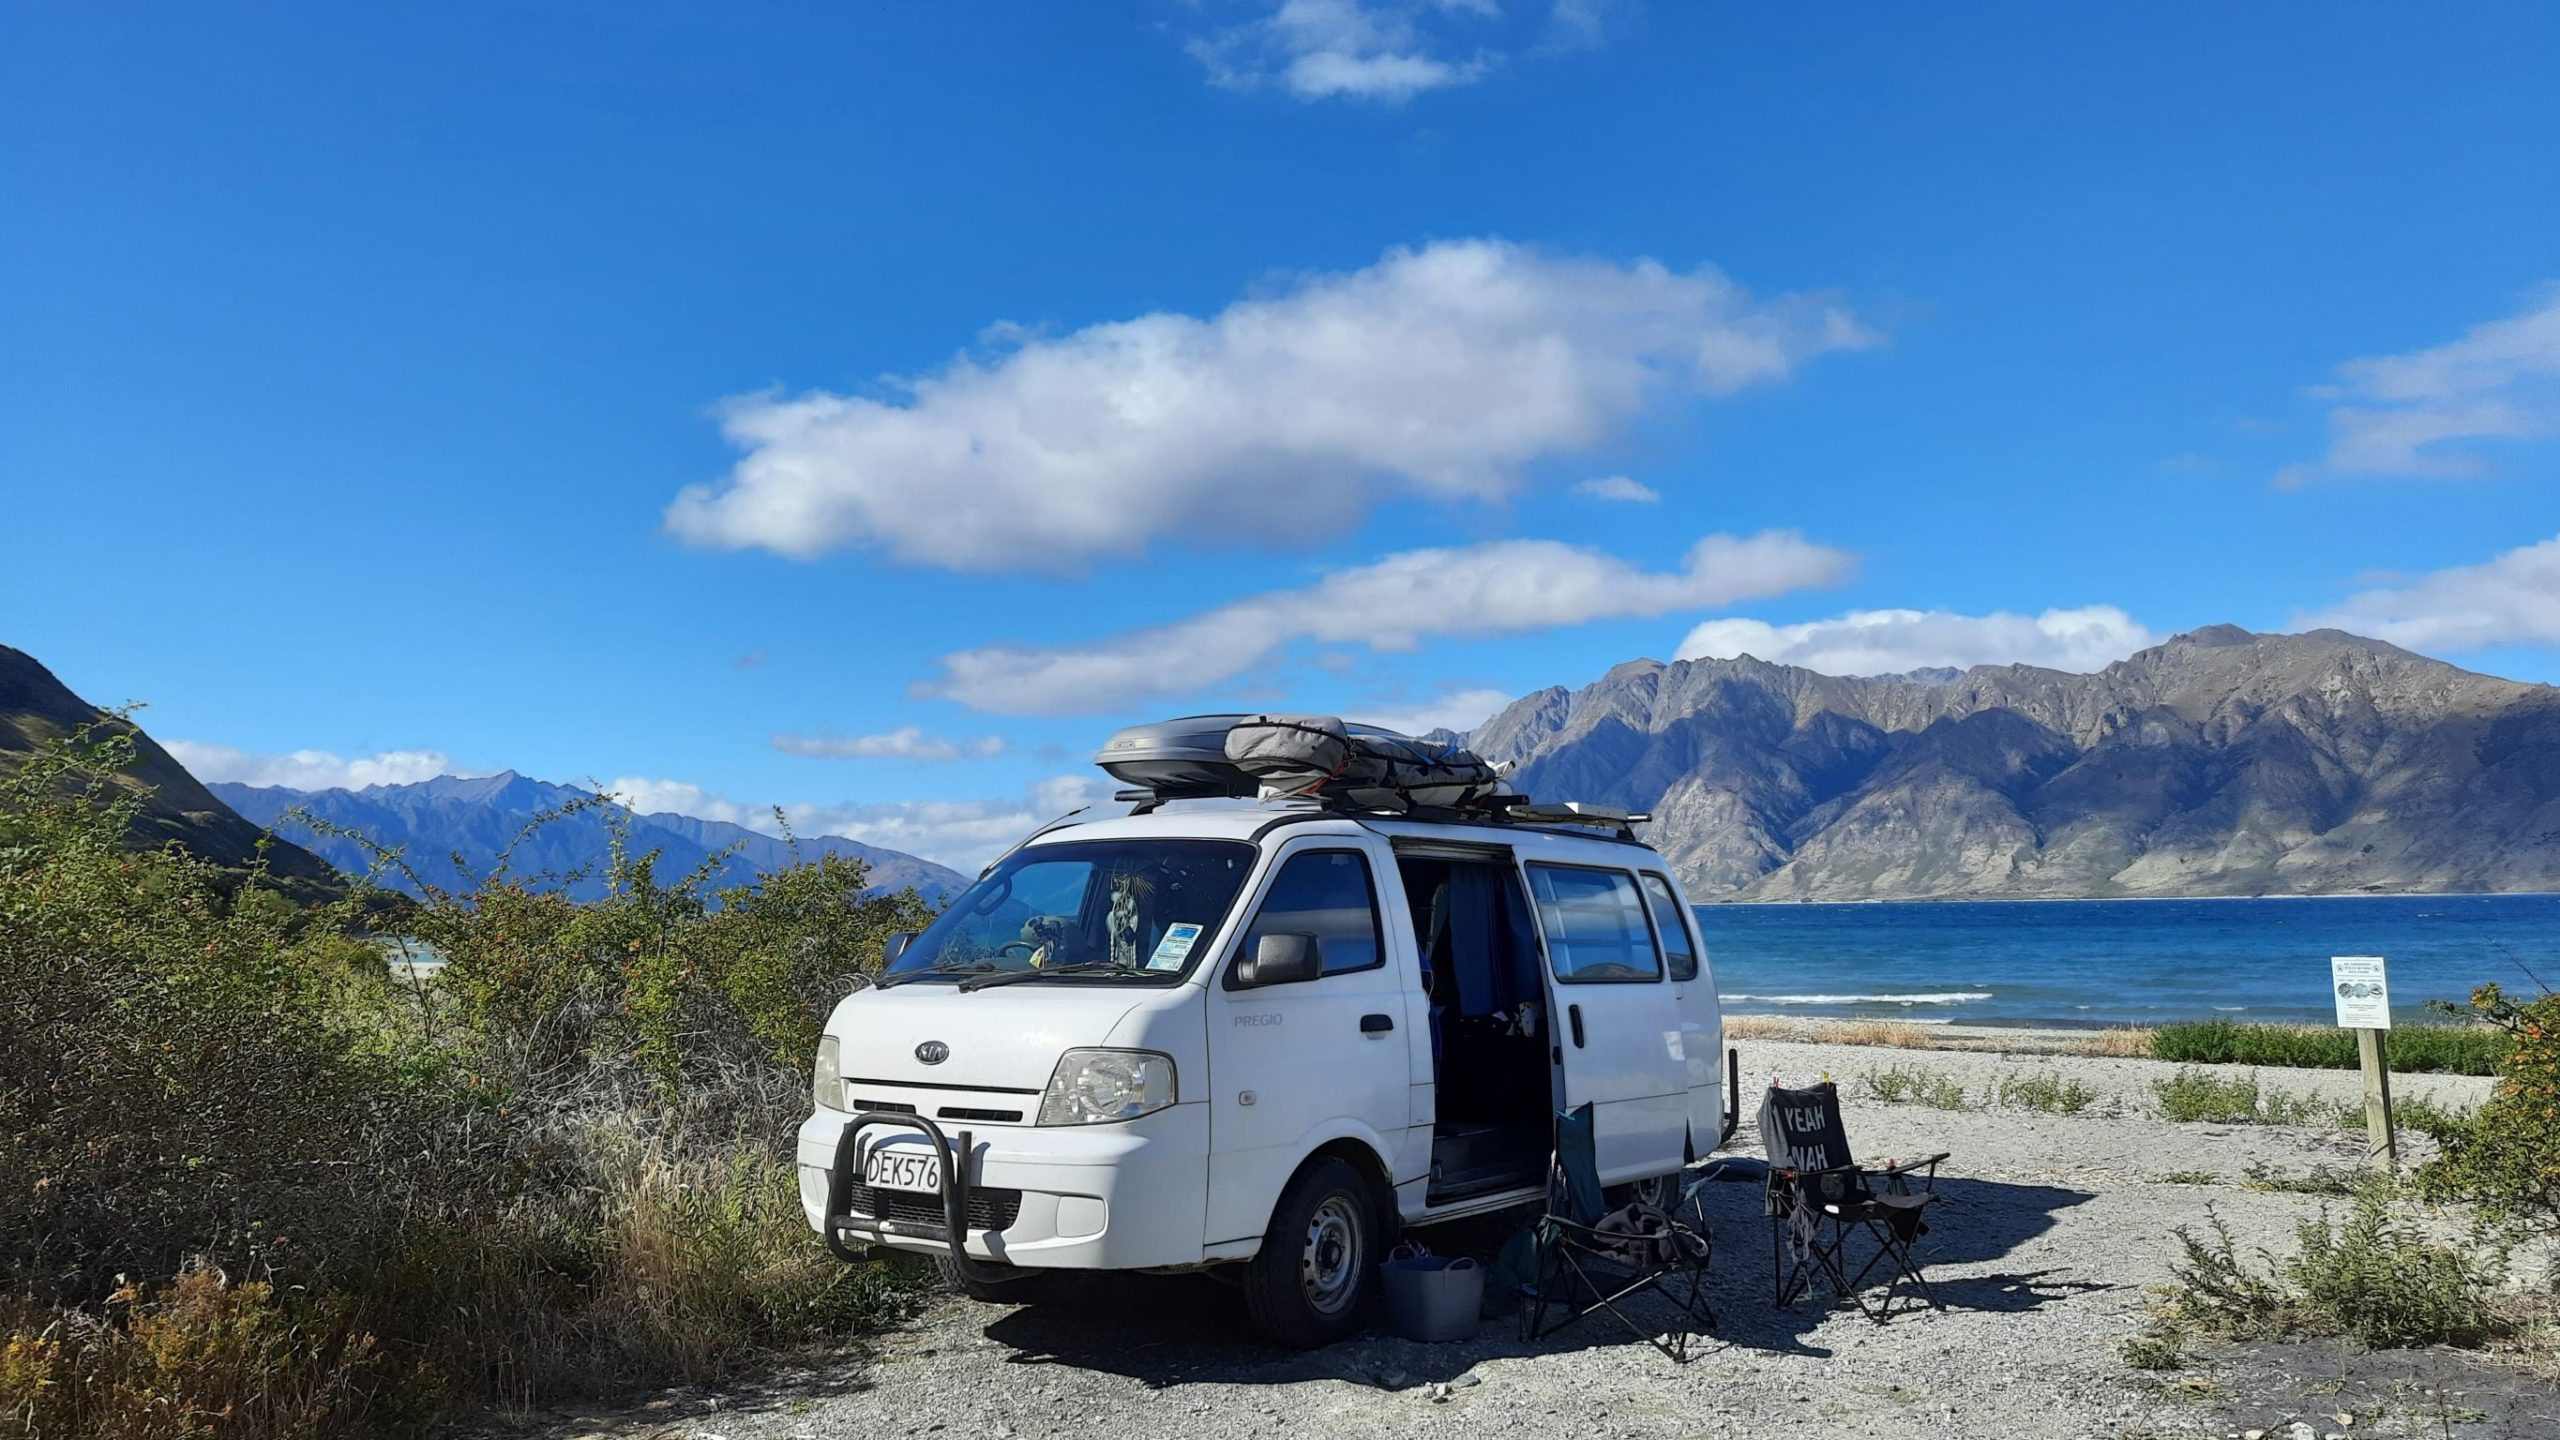 You are currently viewing Camping in NZ – Camper en NZ